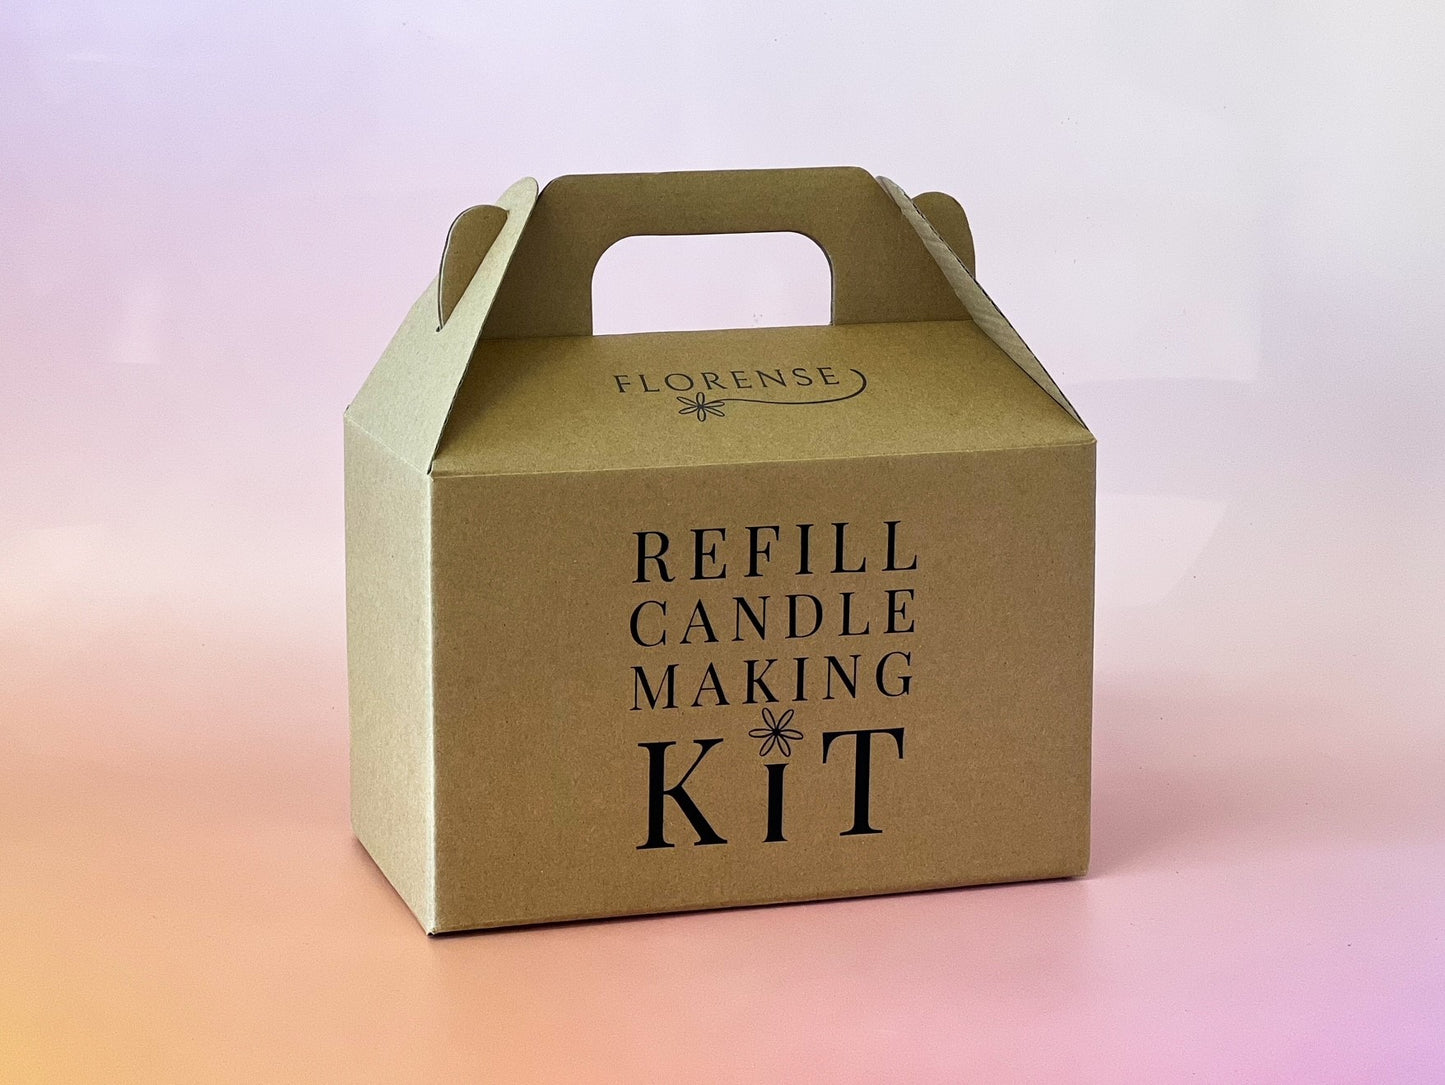 Refill Candle Making Kit